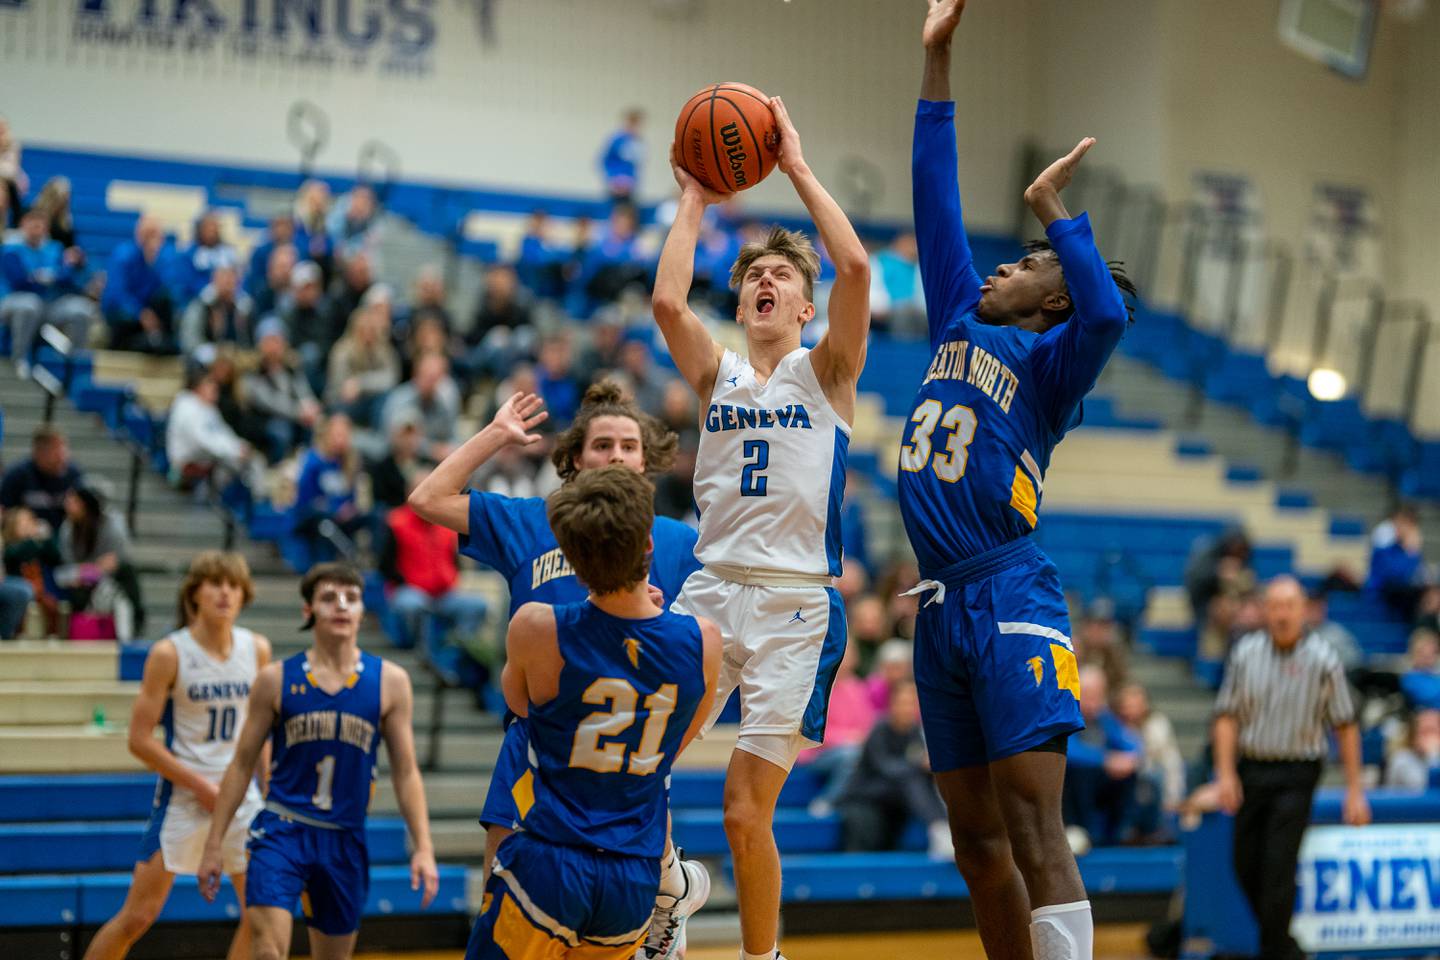 Geneva’s Michael Lawrence (2) shoots the post against Wheaton North's Jalen Crues (33) and Connor Speers (21) during a basketball game at Geneva High School on Friday, Jan 6, 2023.